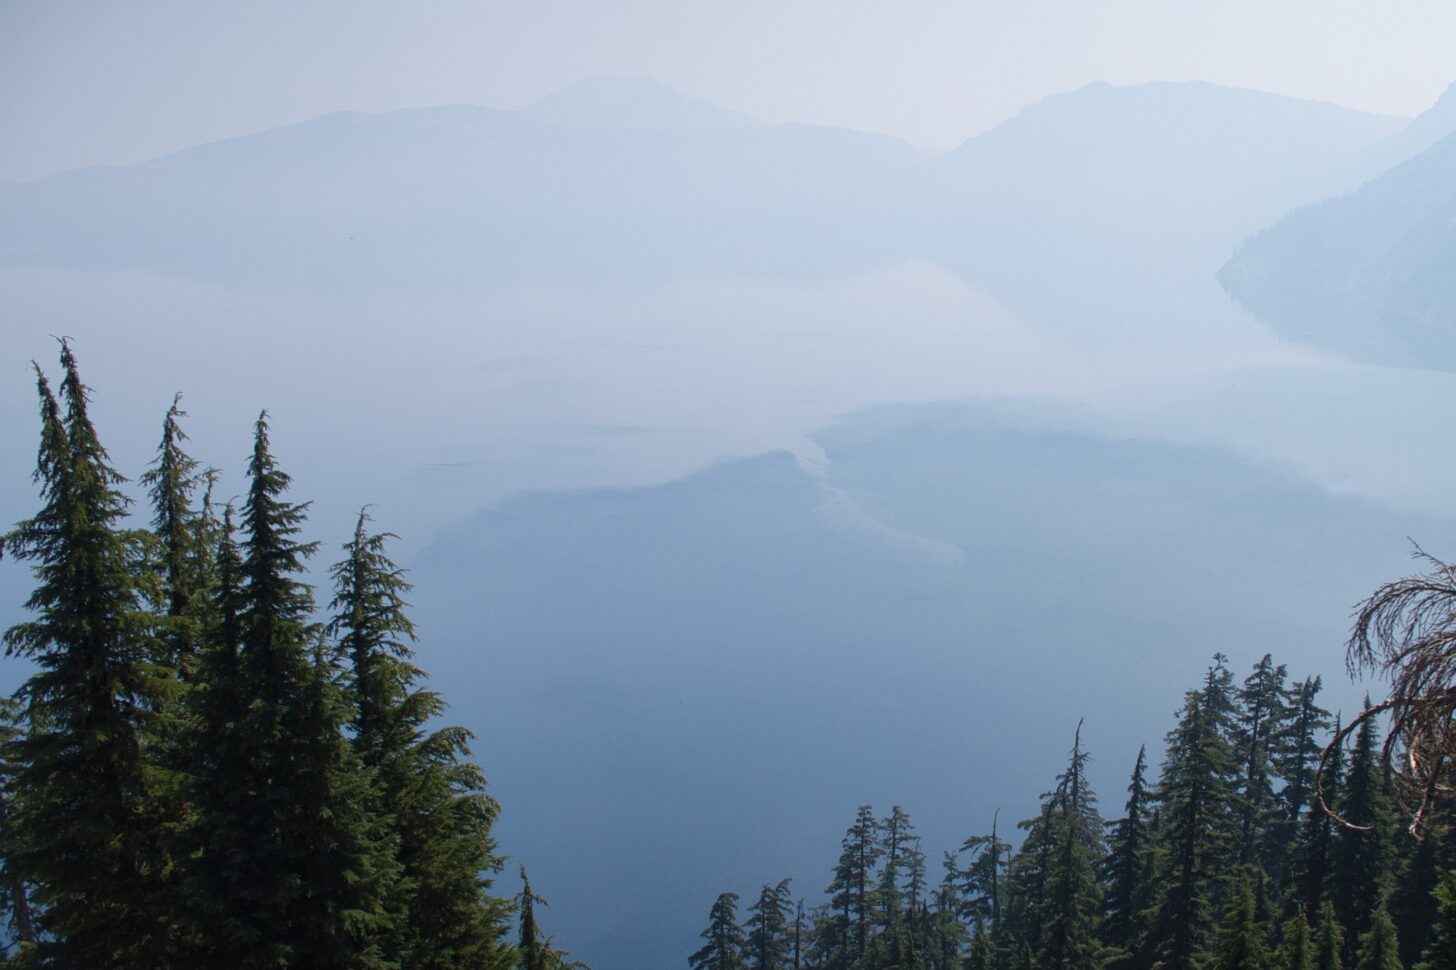 in the foreground, pine trees. In the background, smoke and haze obscure the lake.